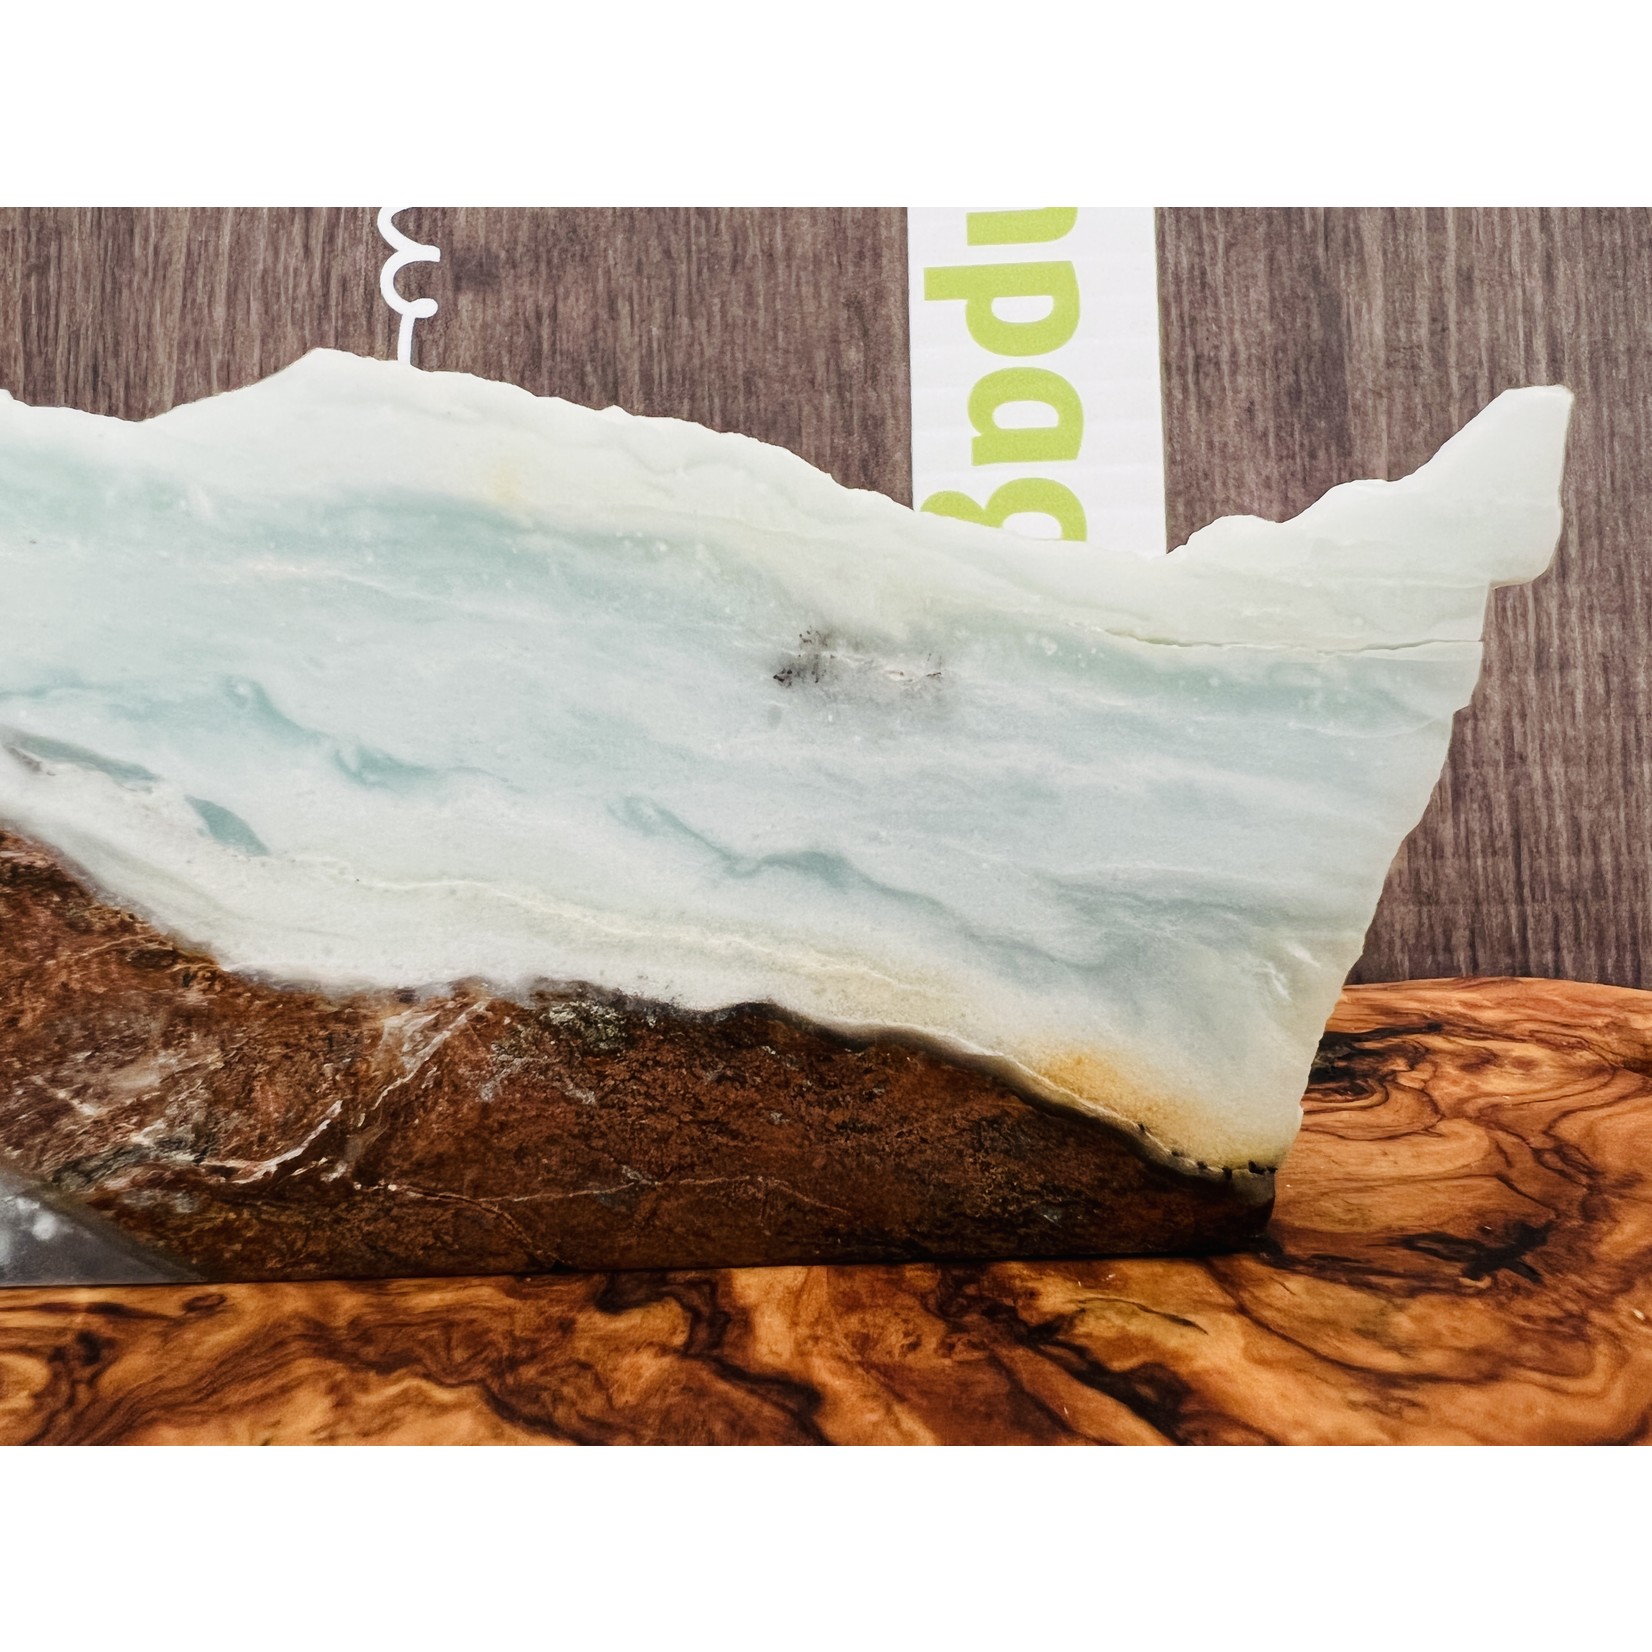 supernatural BC ocean picture stone polished, named for its ability to create stunning ocean scenes, be found in British Columbia Canada